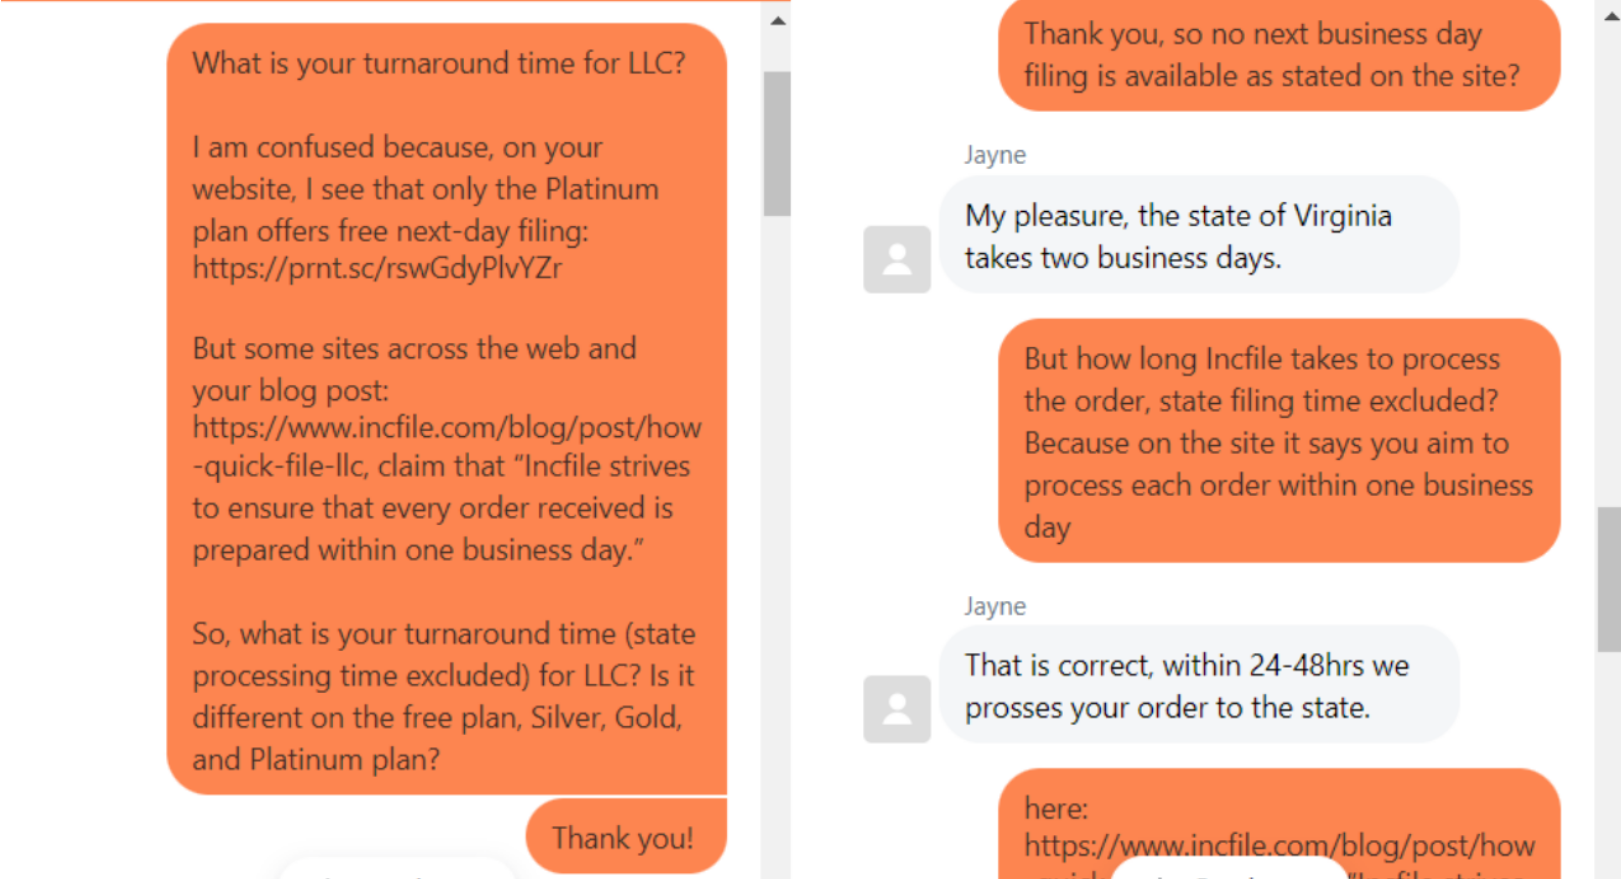 Bizee's live chat support conversation